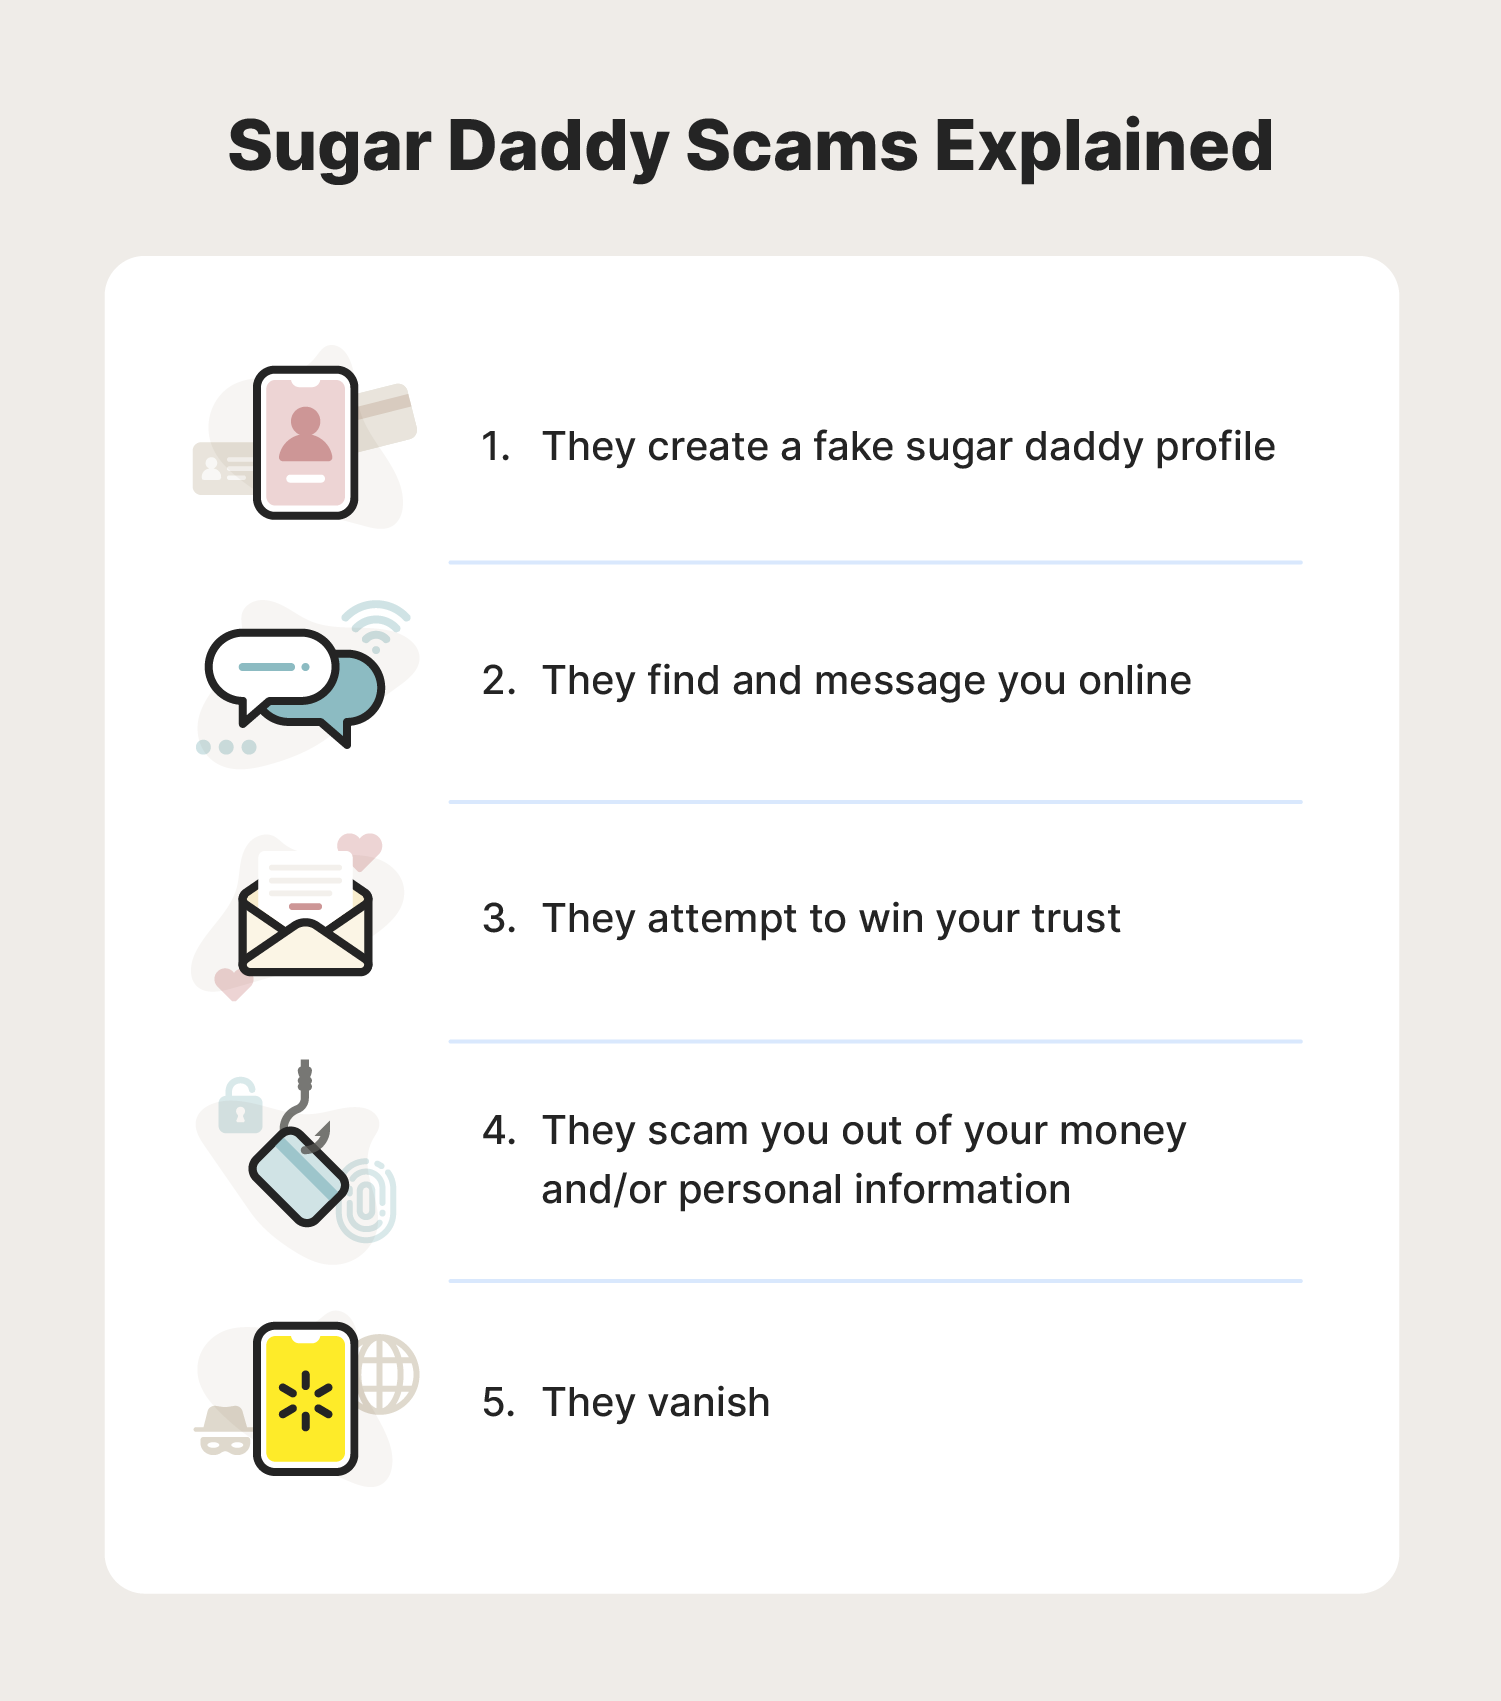 A graphic breaks down how a sugar daddy scam works.